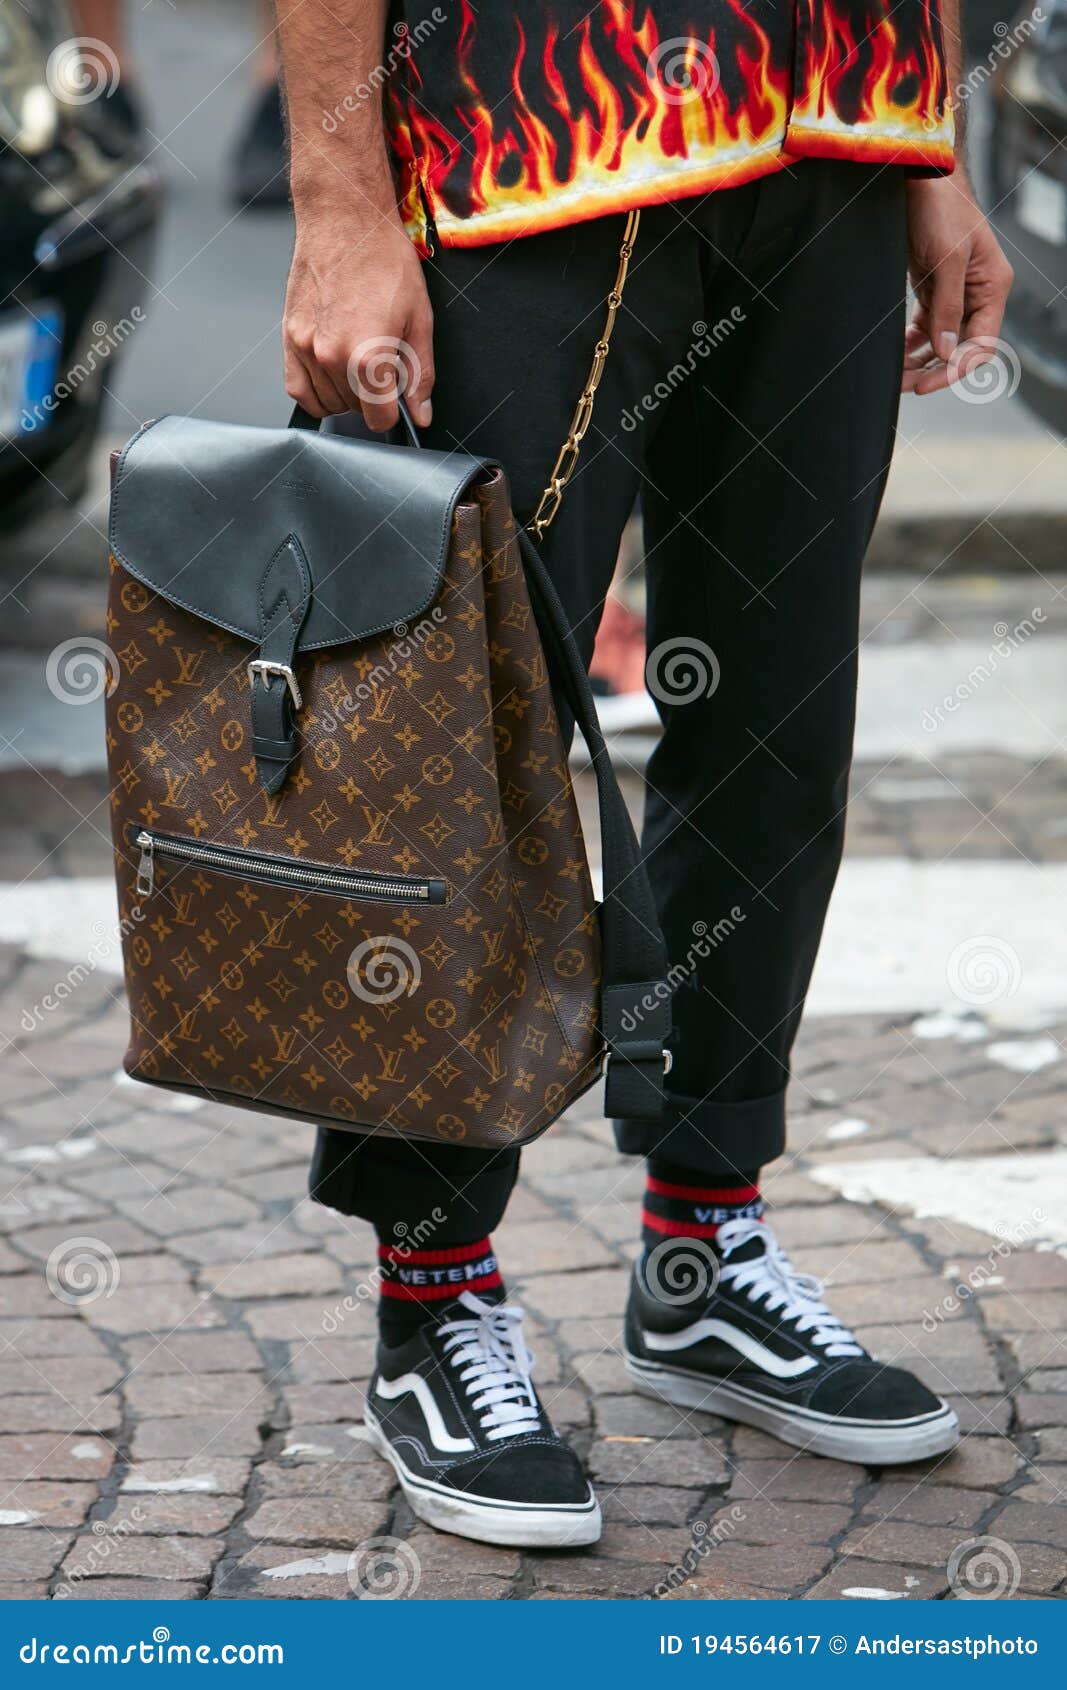 Man with Louis Vuitton Backpack and Shirt with Flames before